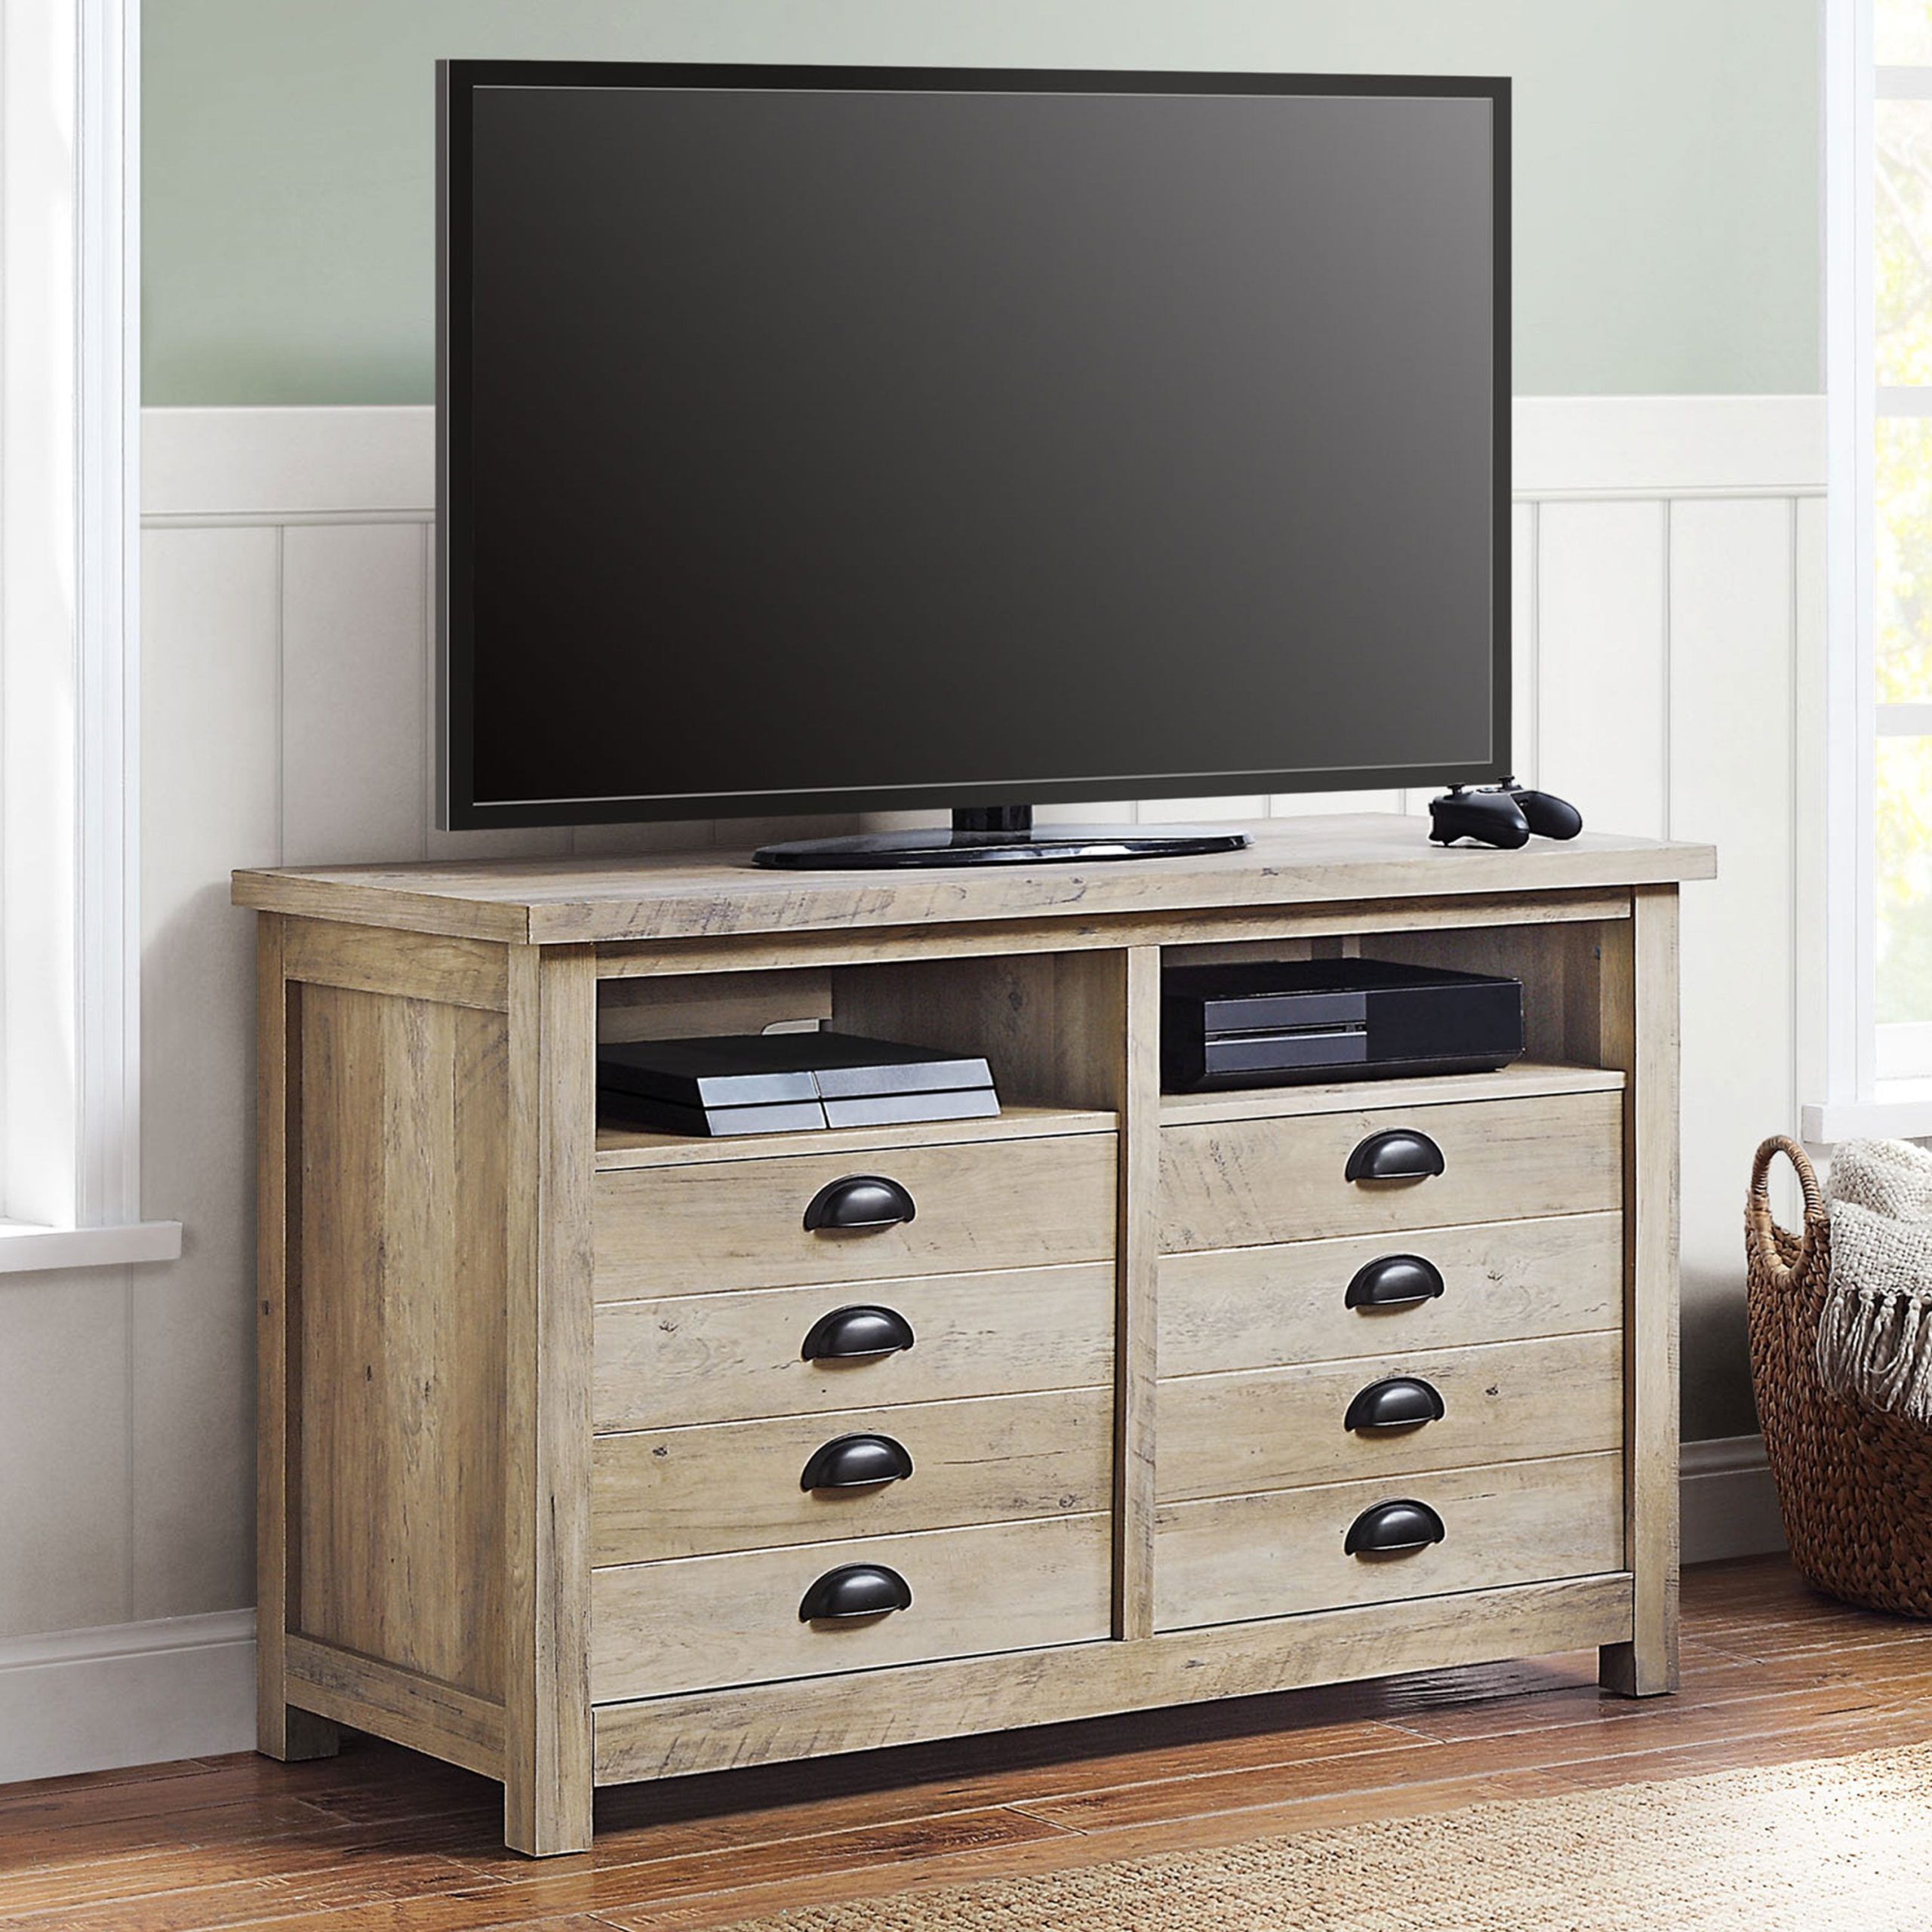 Better Homes & Gardens Granary Modern Farmhouse Tv Stand For Tvs Up To For Modern Farmhouse Rustic Tv Stands (Gallery 1 of 20)